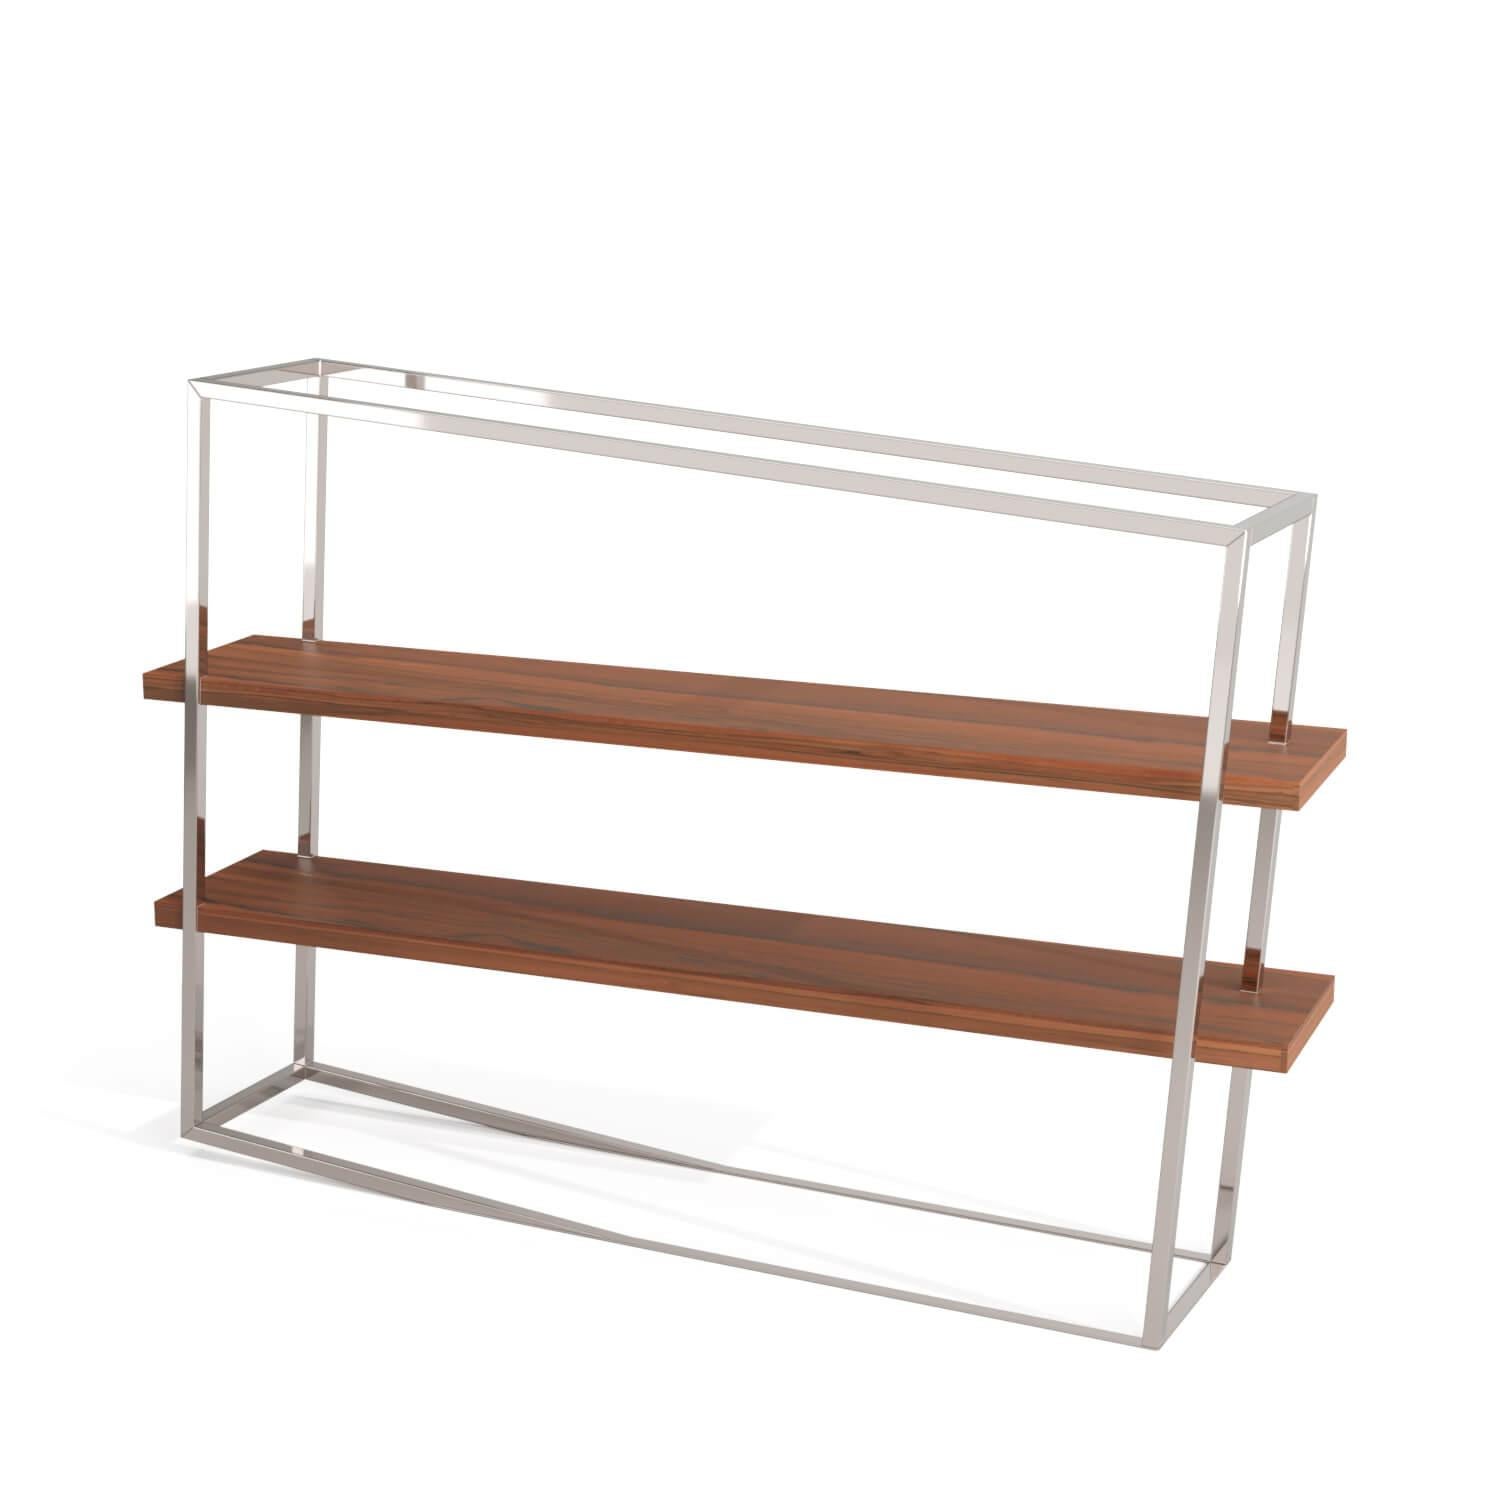 Portuguese Modern Accent Bookcase with Shelves in Tineo Wood and Brushed Stainless Steel For Sale